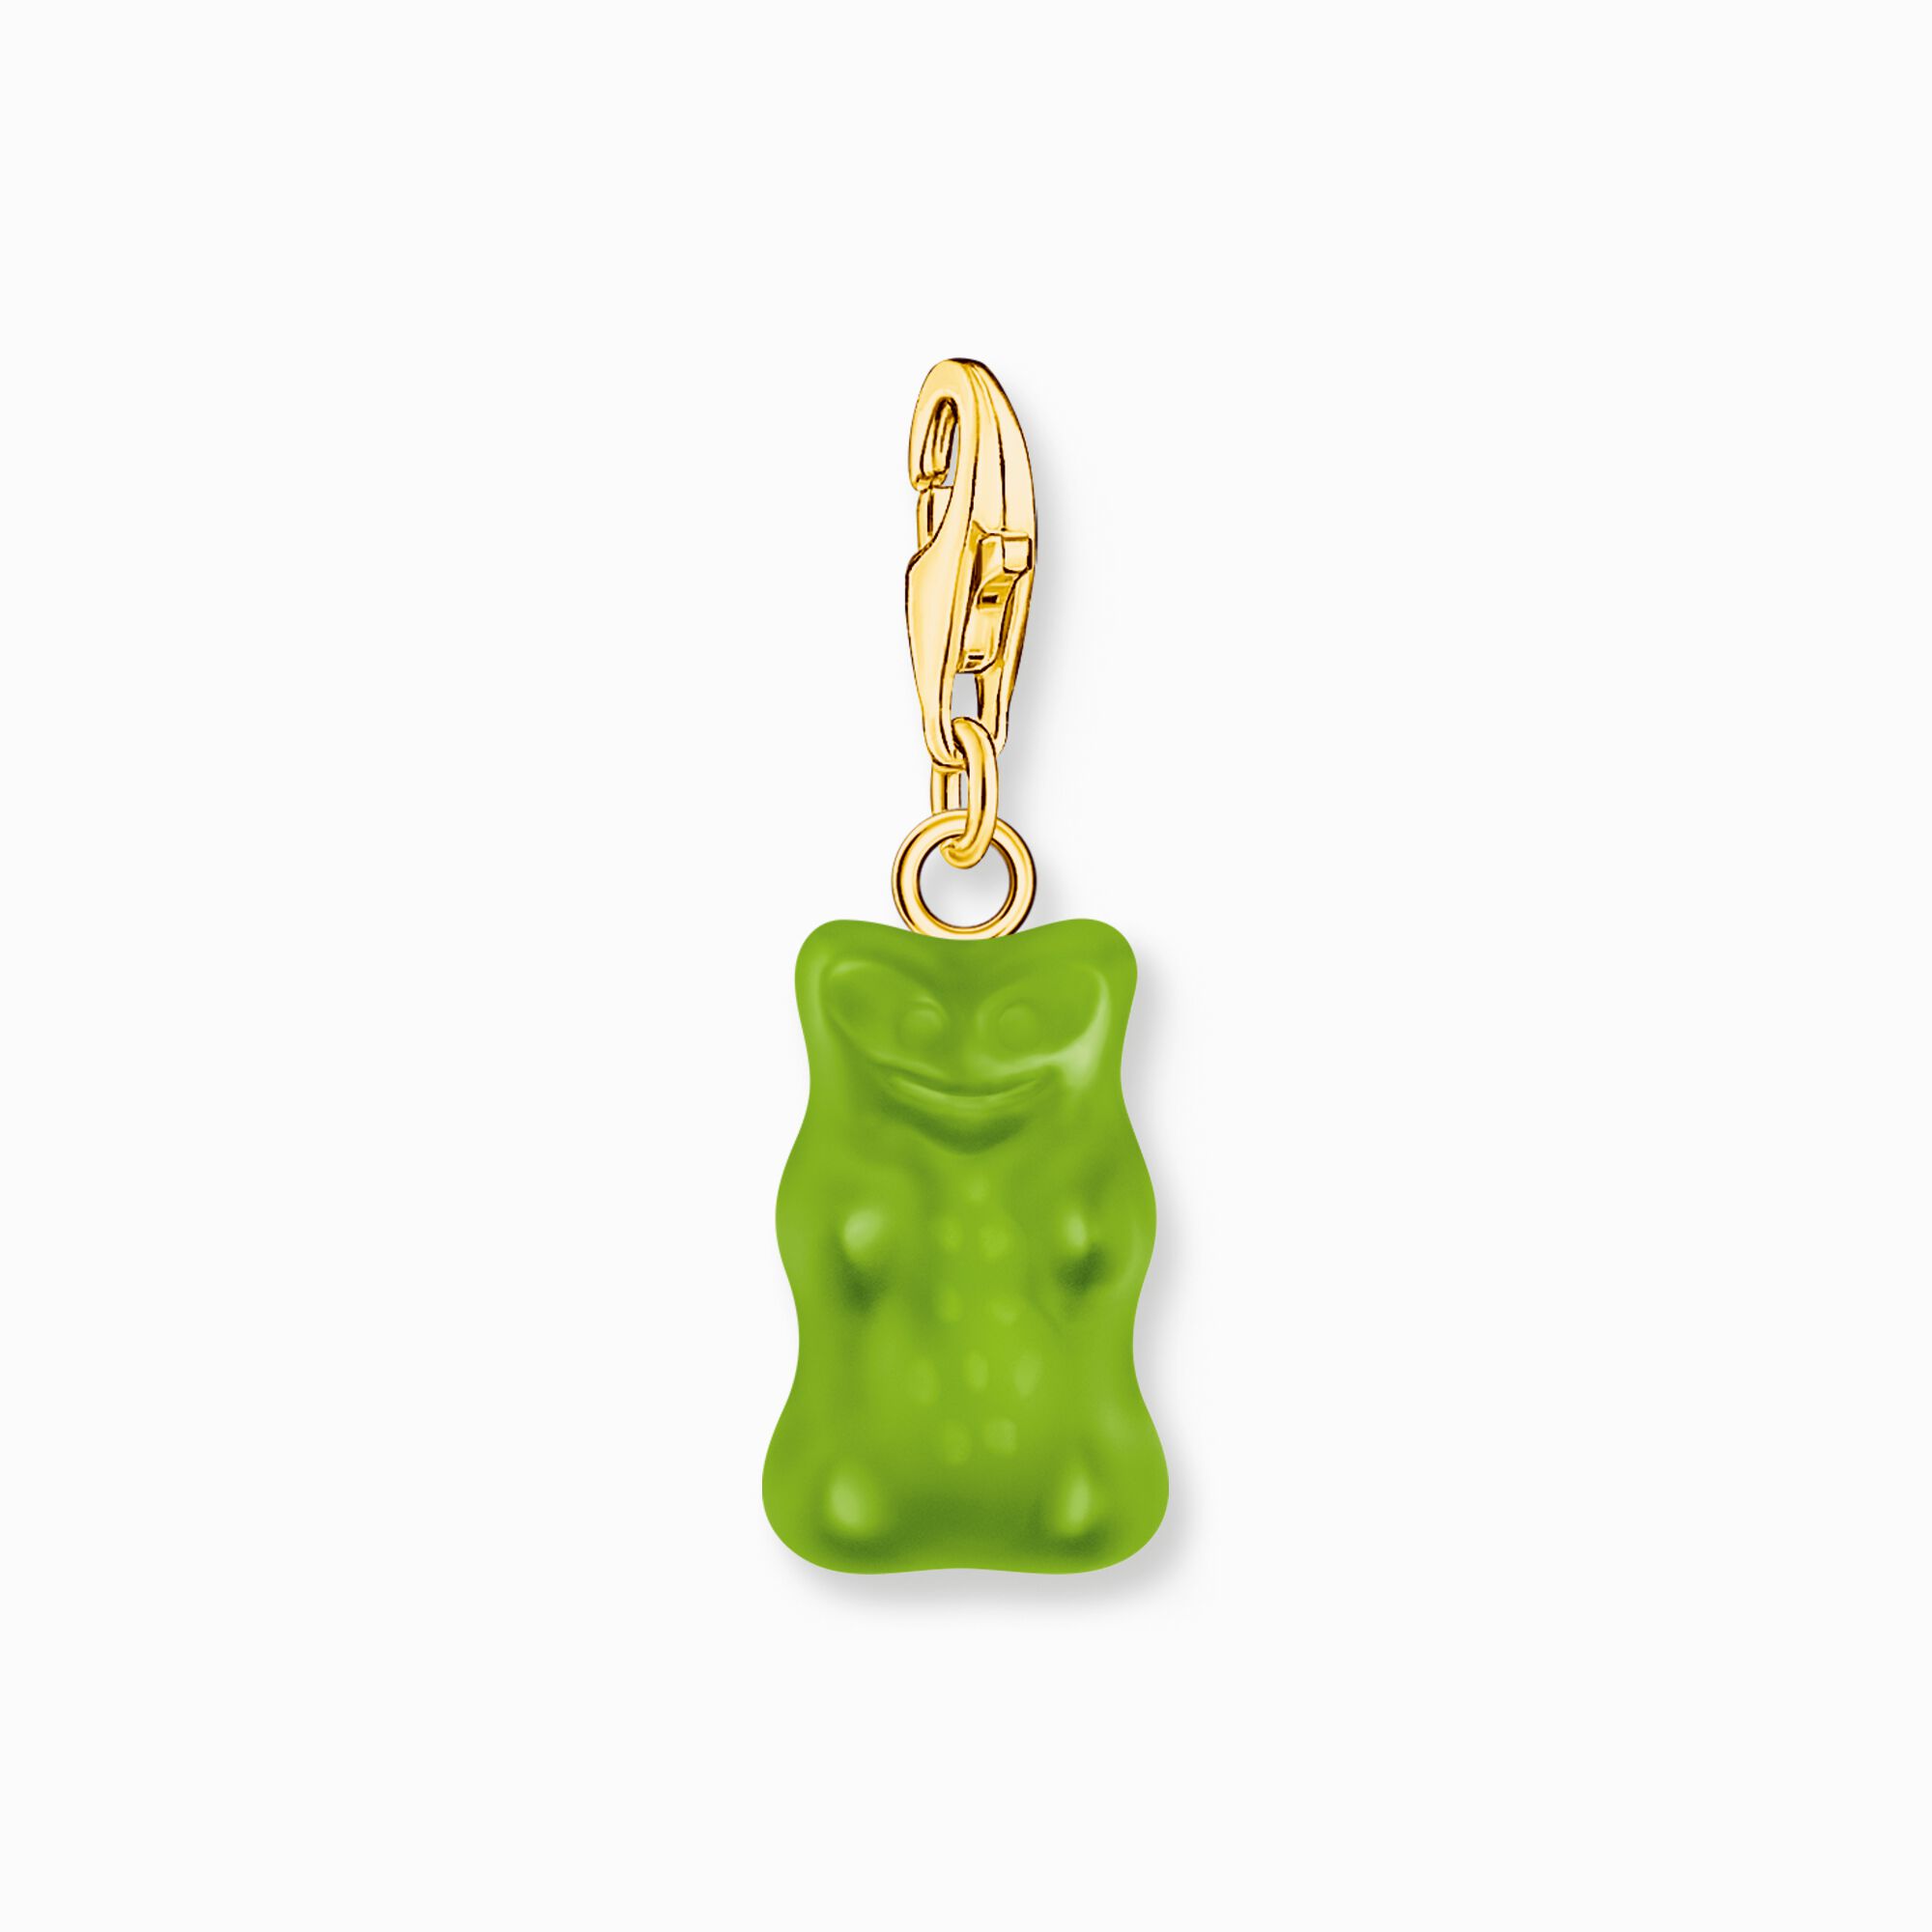 Gold-plated charm pendant goldbears in green from the Charm Club collection in the THOMAS SABO online store